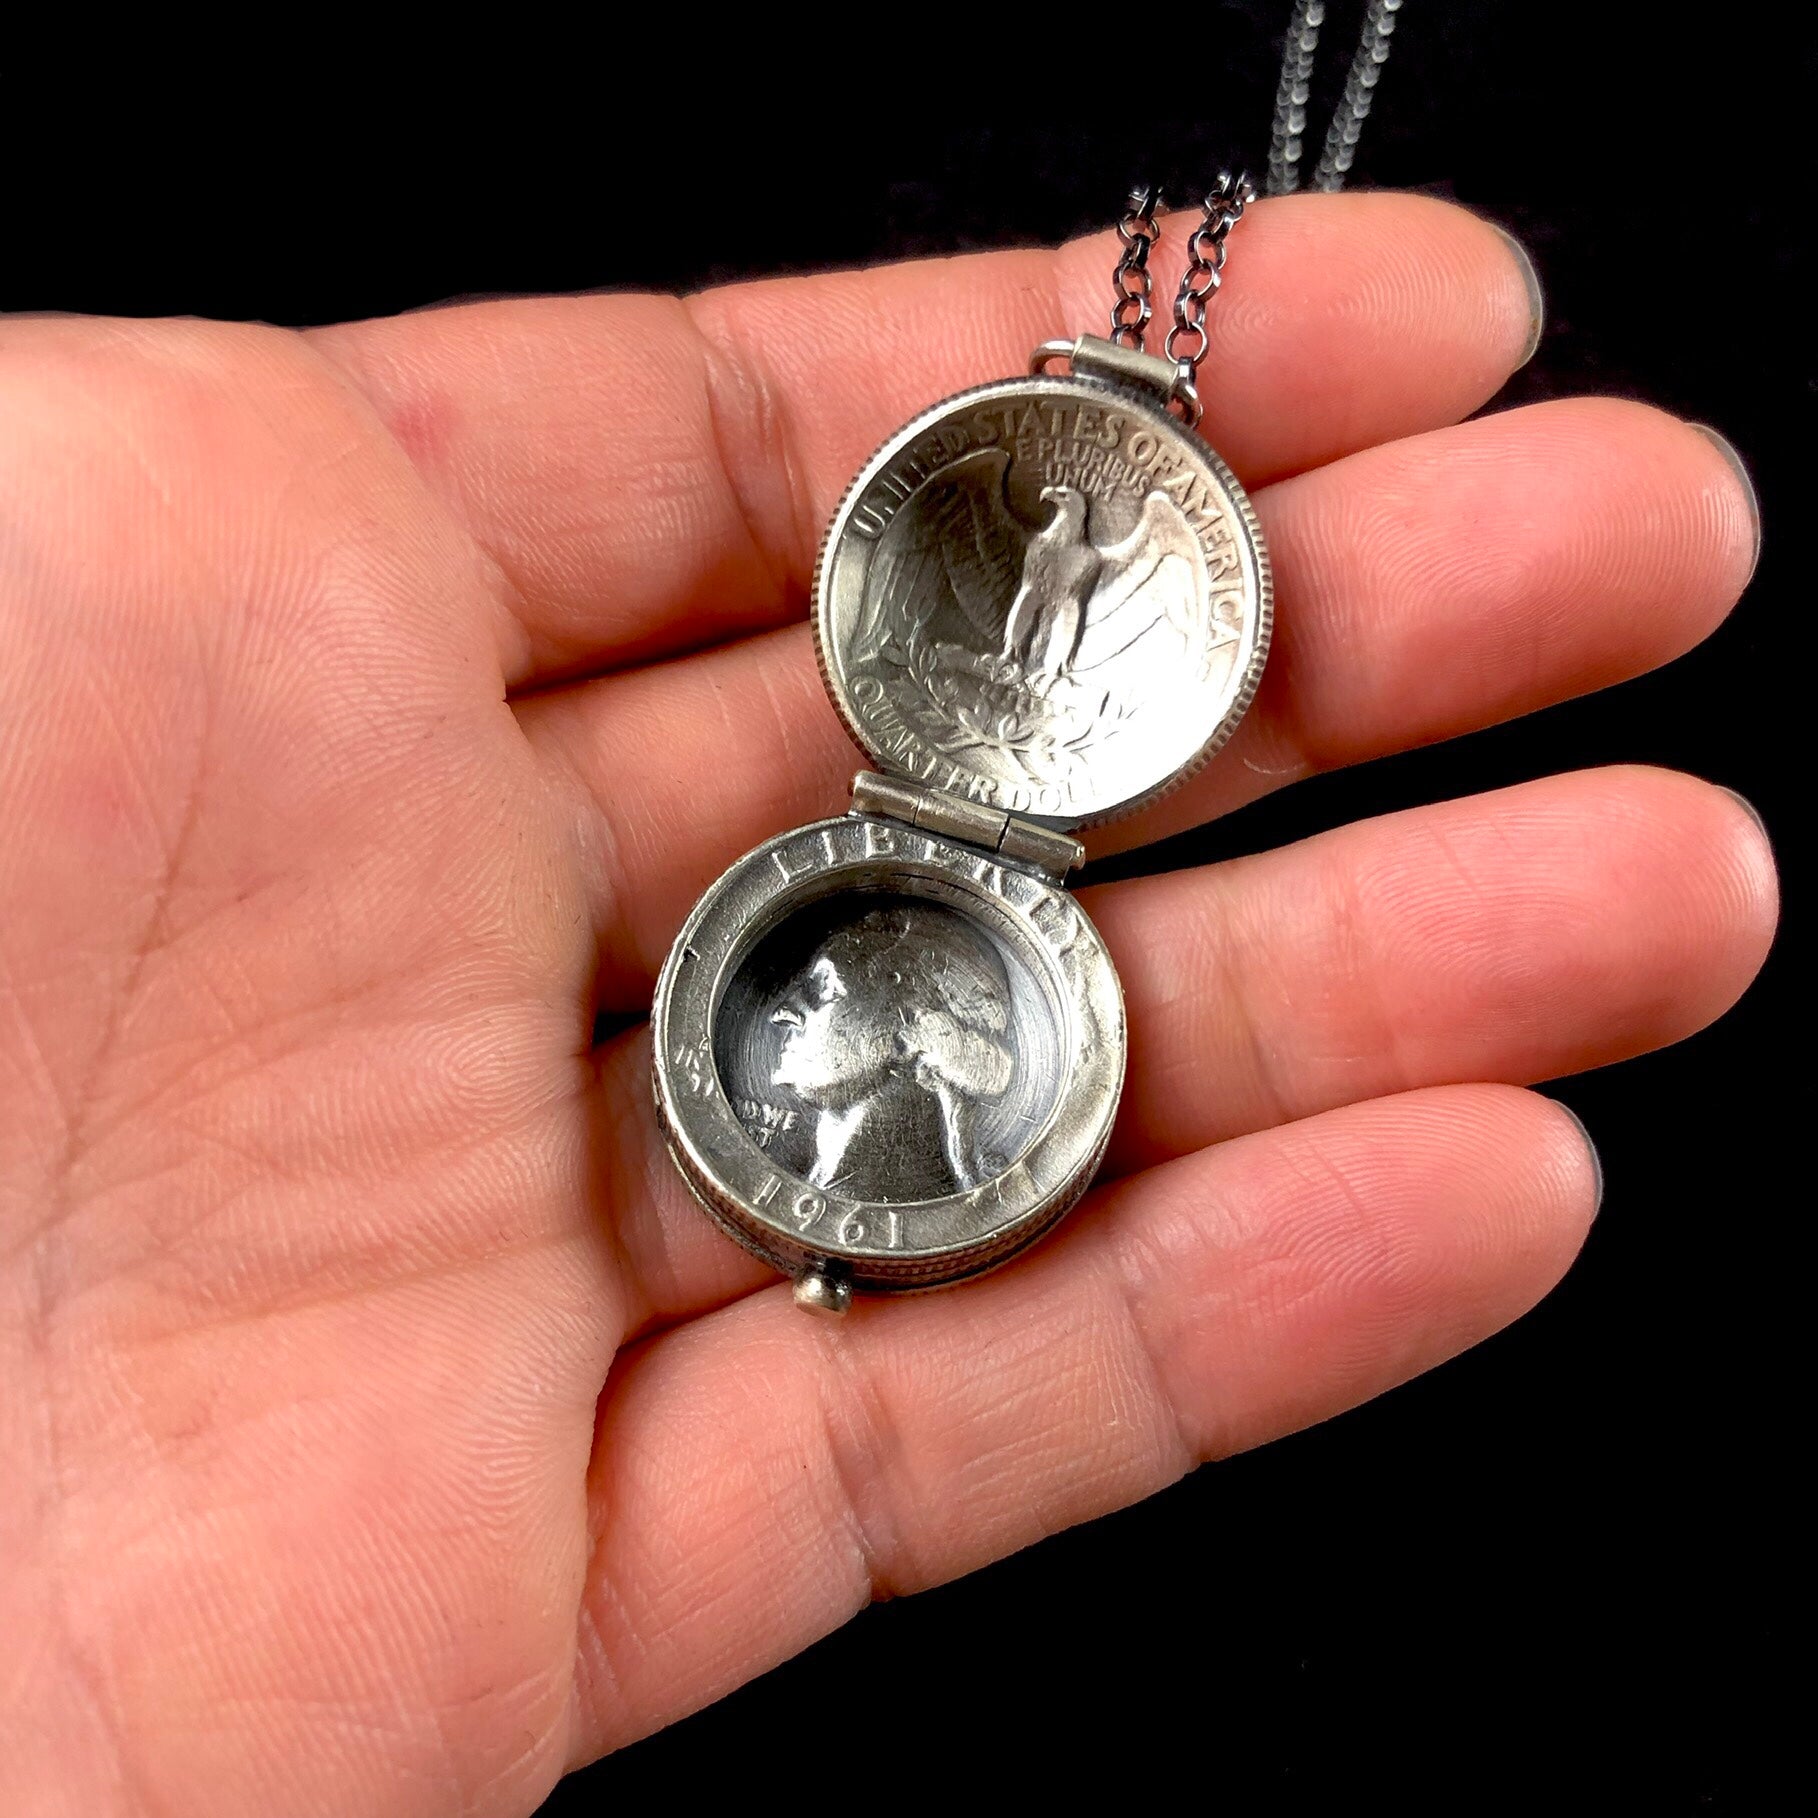 Quarter Locket Coin Necklace shown open in hand for size reference